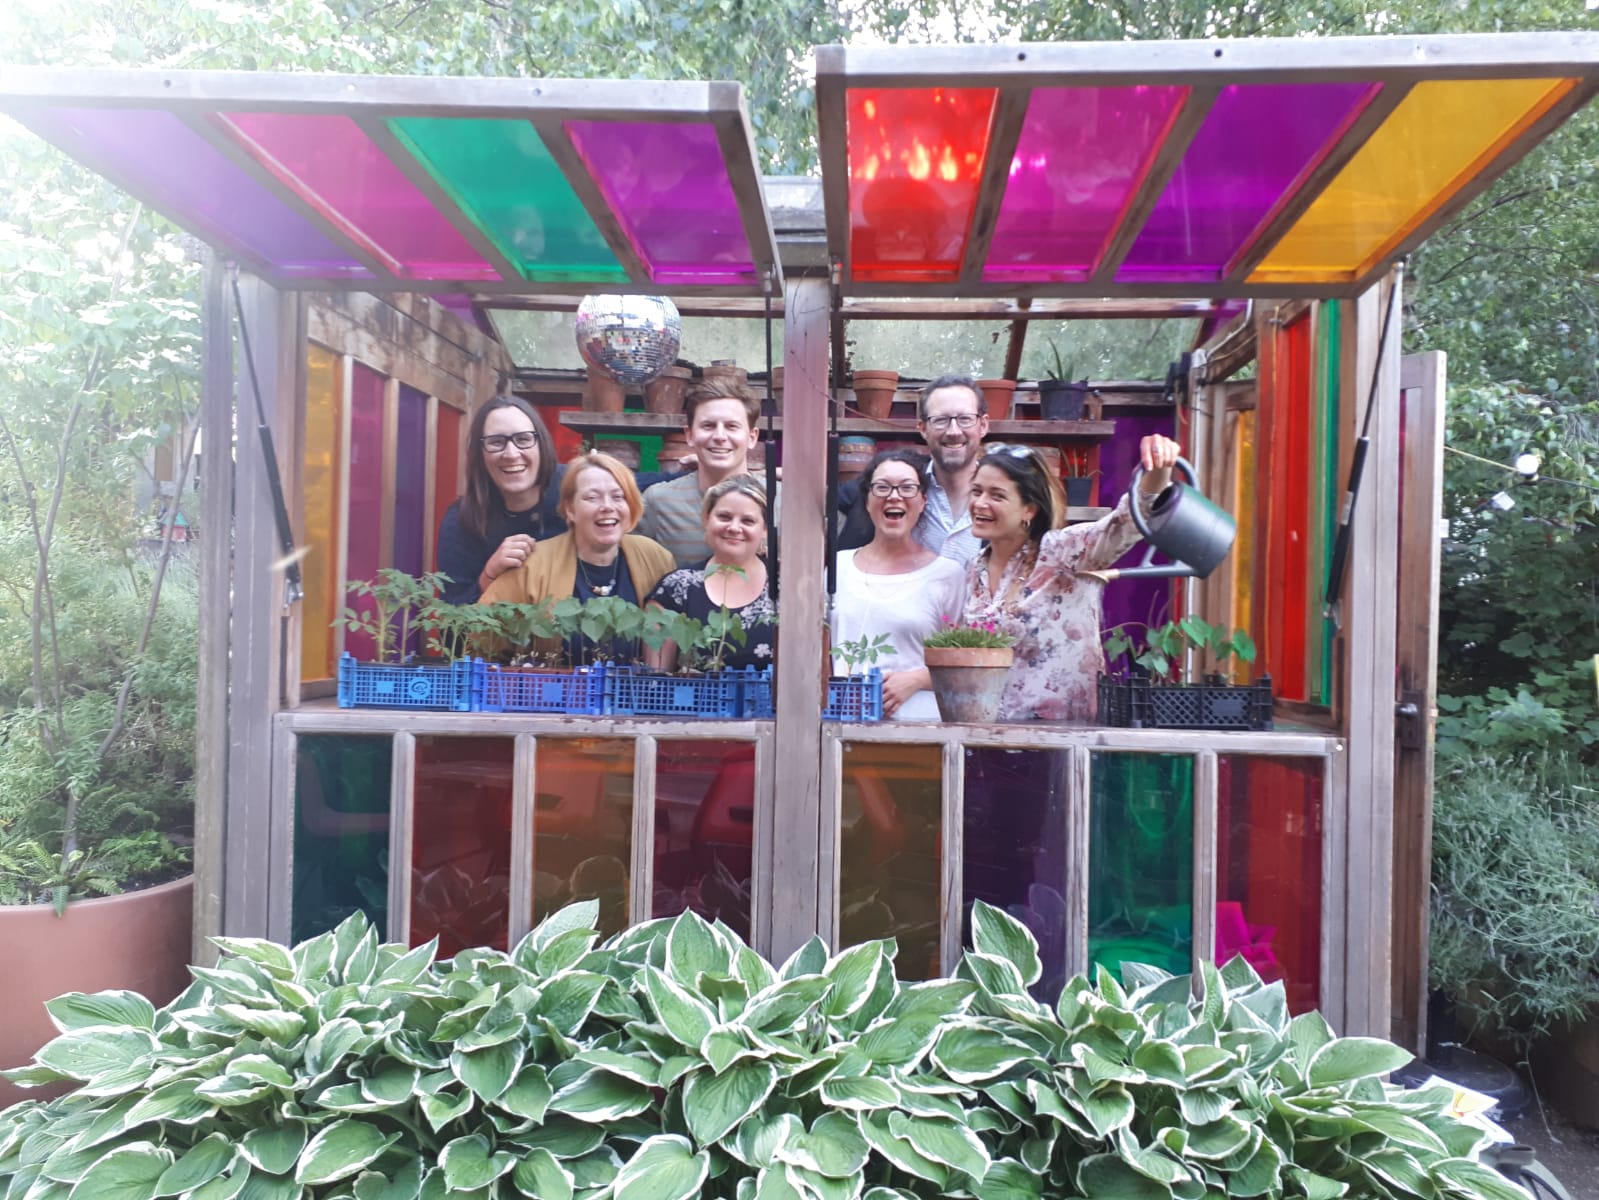 The ActionFunder team are all smiling in a colourful shed